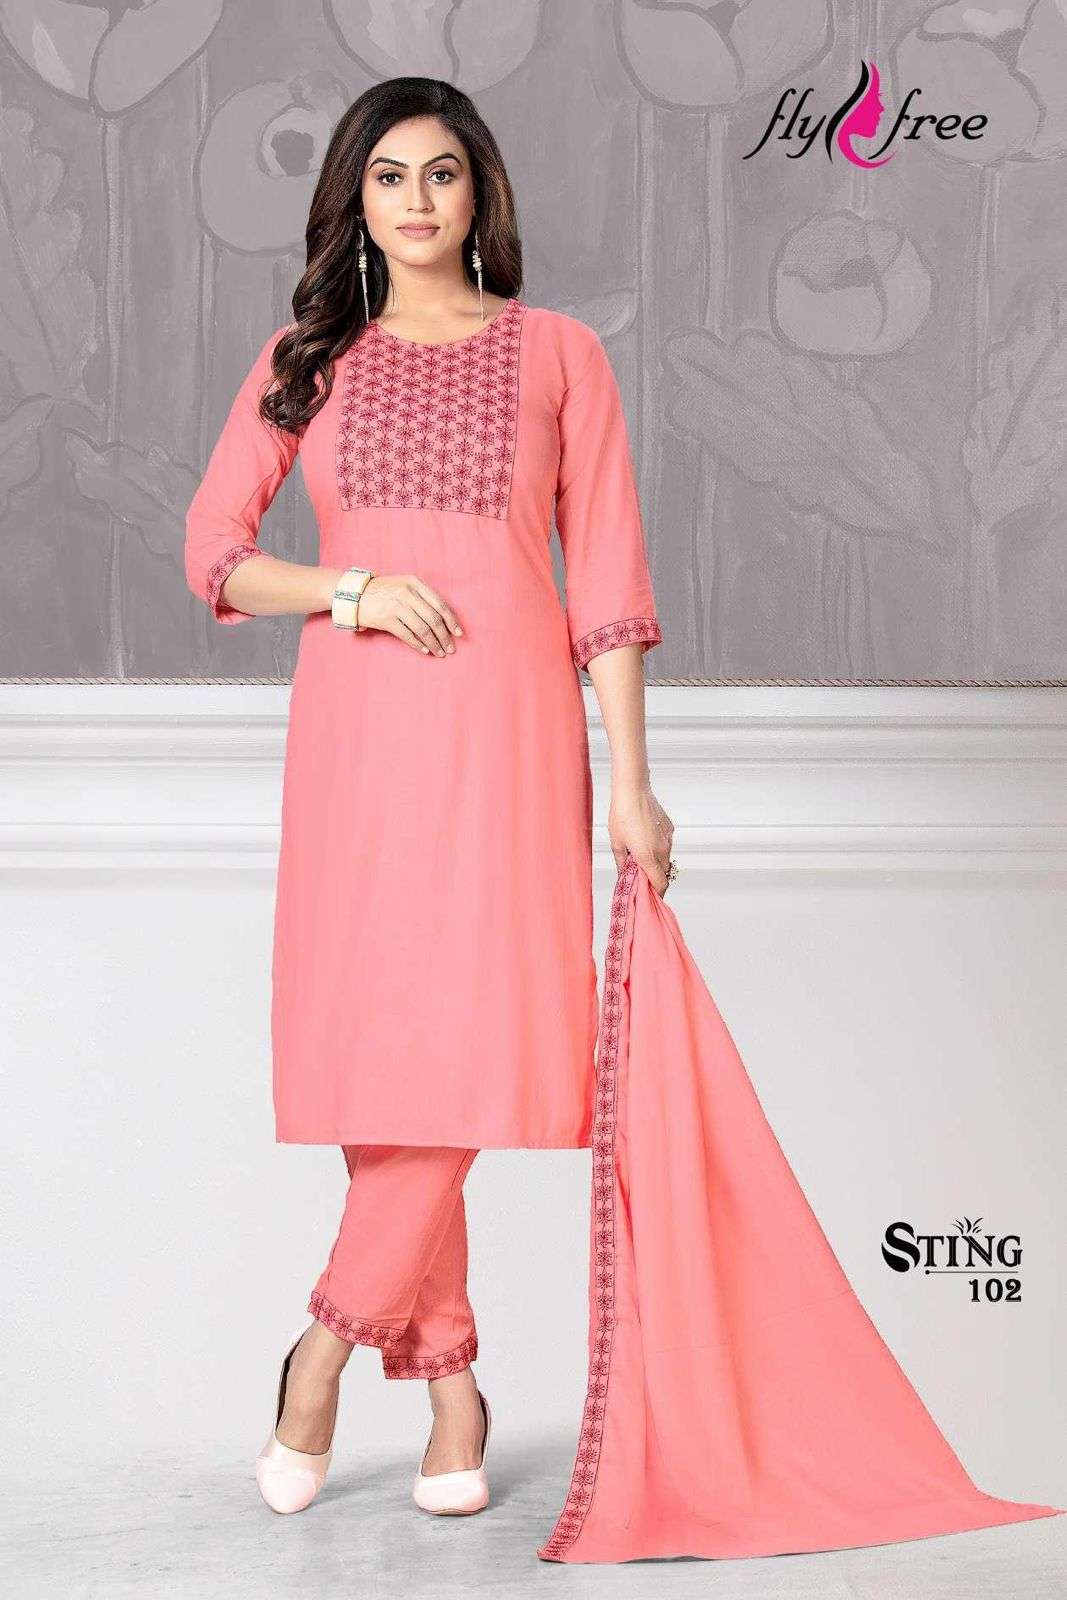 STING BY FLY FREE 101 TO 106 SERIES BEAUTIFUL SUITS COLORFUL STYLISH FANCY CASUAL WEAR & ETHNIC WEAR RAYON EMBROIDERED DRESSES AT WHOLESALE PRICE